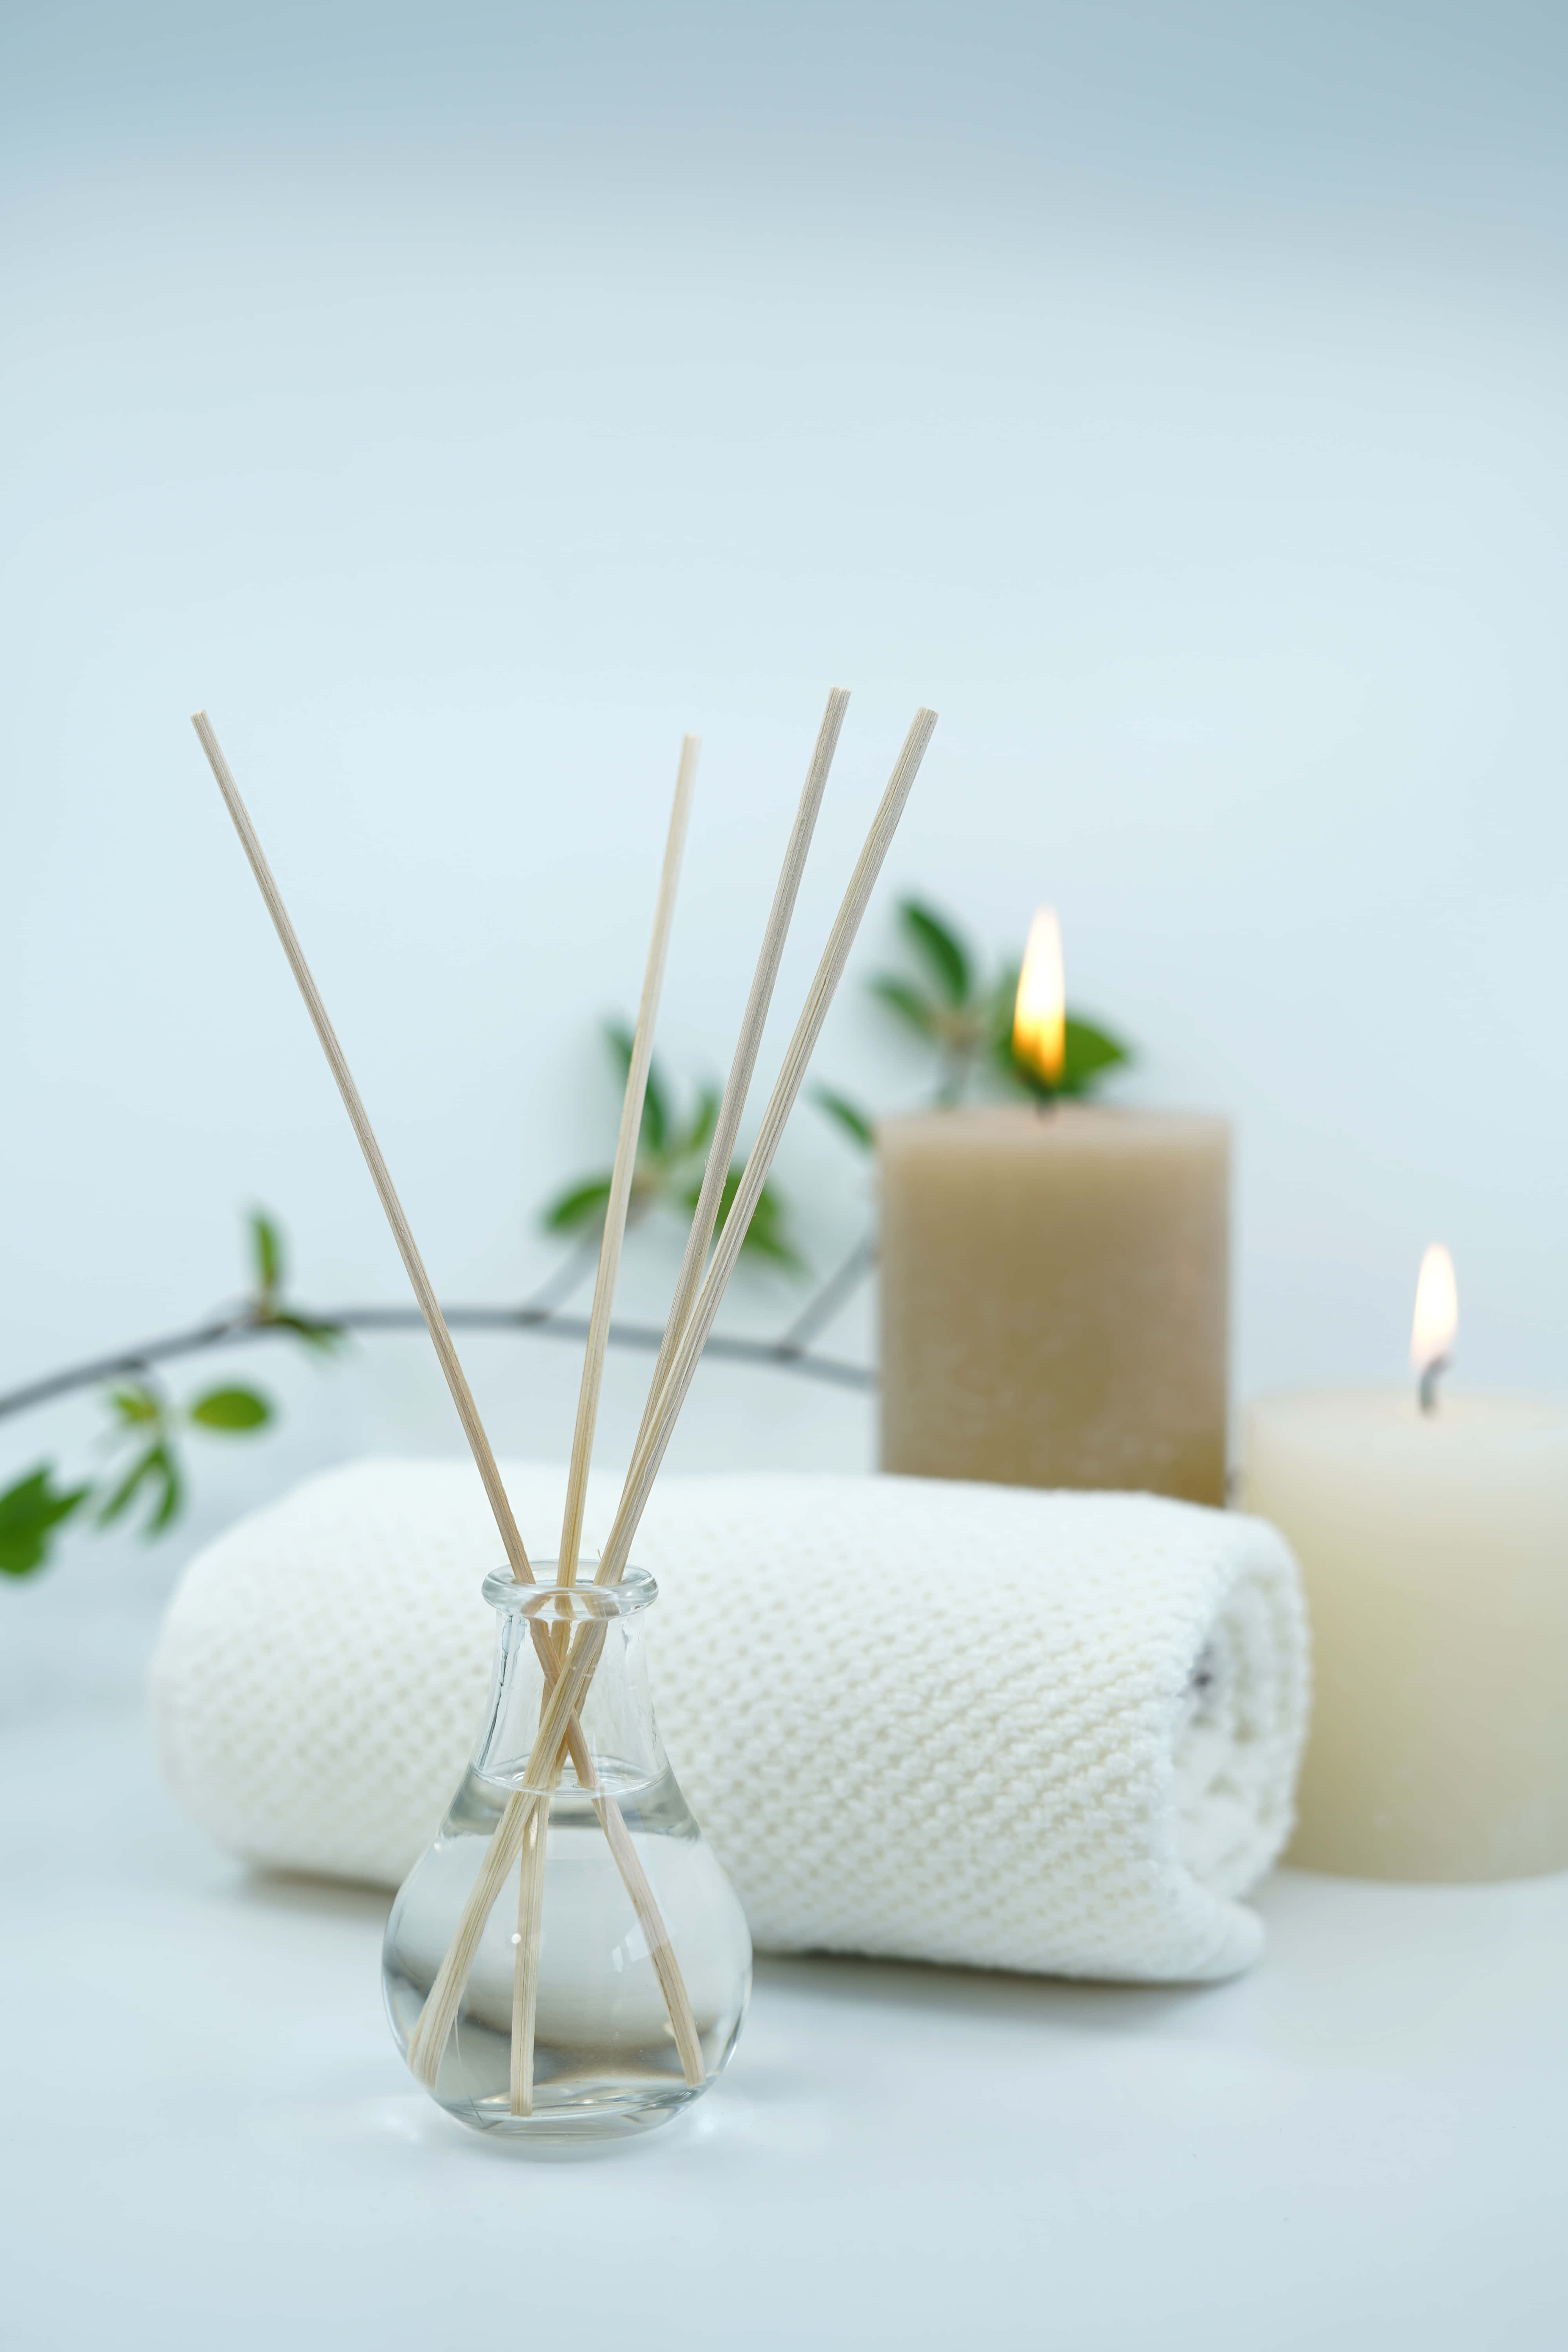 Spa Background Incense Sticks White Towel And Candles